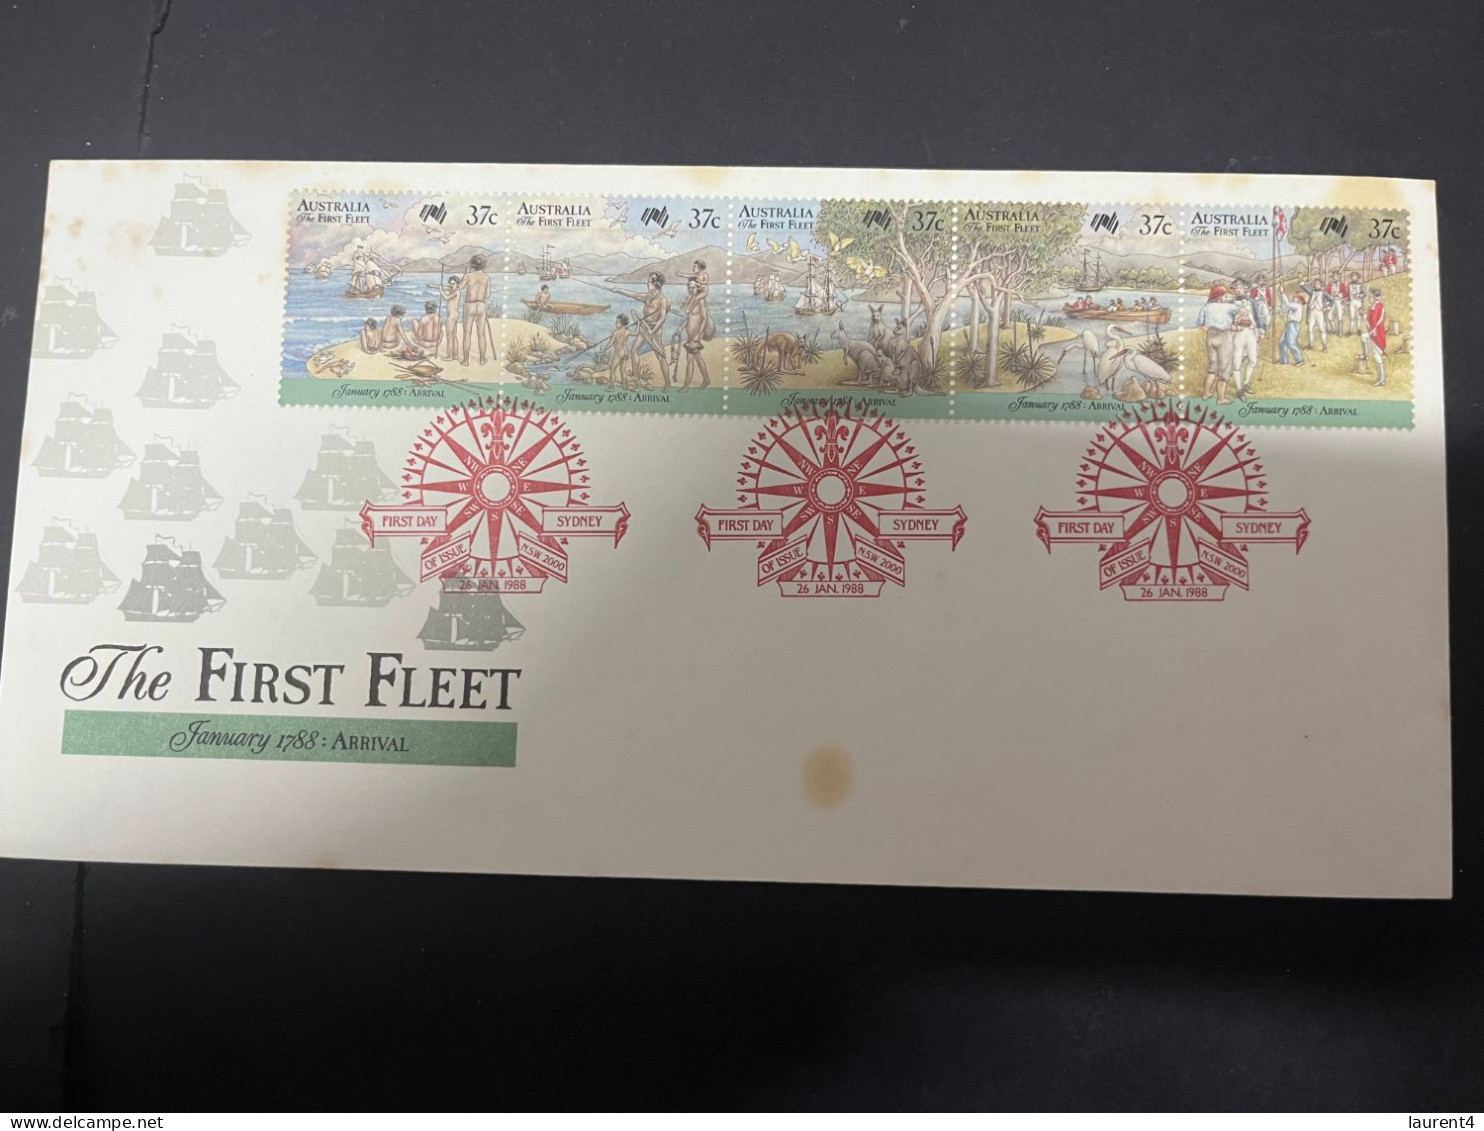 4-5-2024 (4 Z 9)  Australia FDC (2 Covers) The First Fleet (as Seen On Scans) - Premiers Jours (FDC)